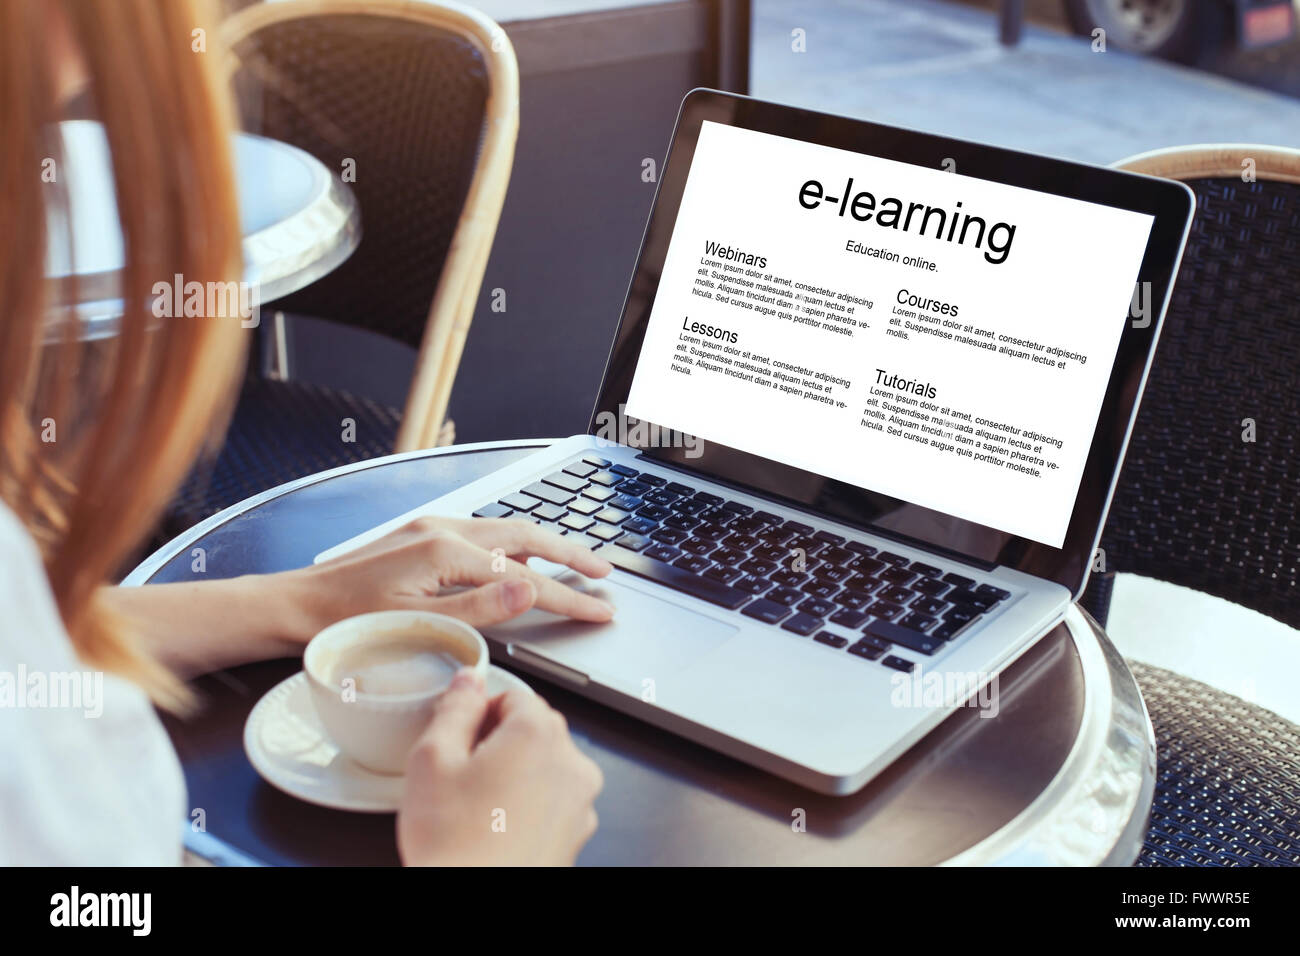 e-learning, education online concept, woman with laptop Stock Photo